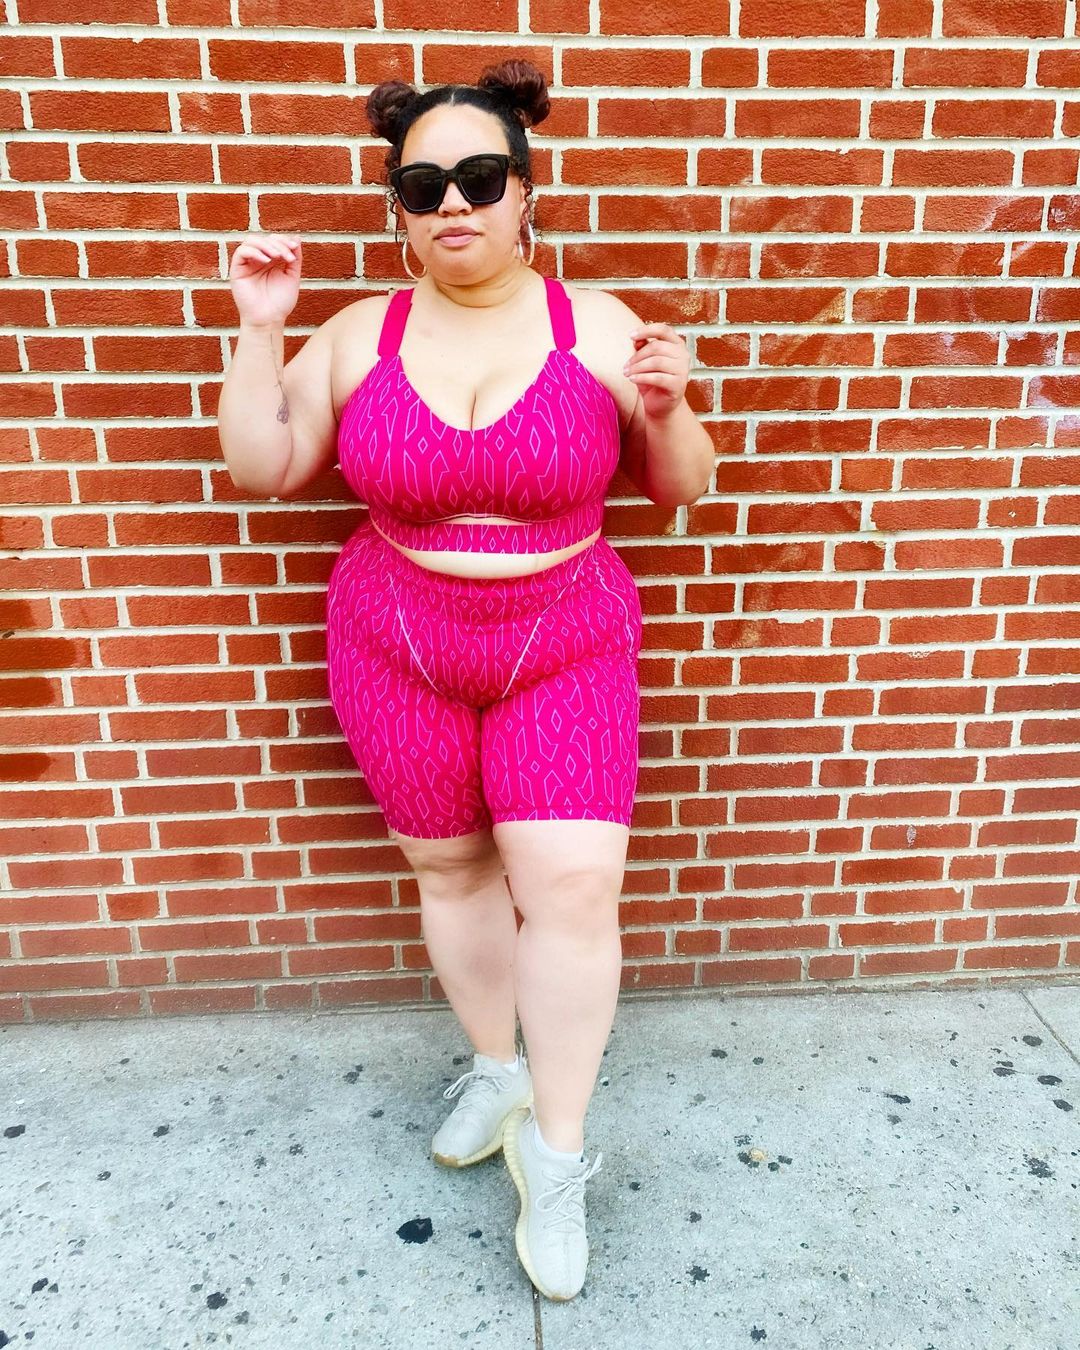 Sun ❄️  Curvy girl fashion, Curvy girl outfits, Thick girls outfits